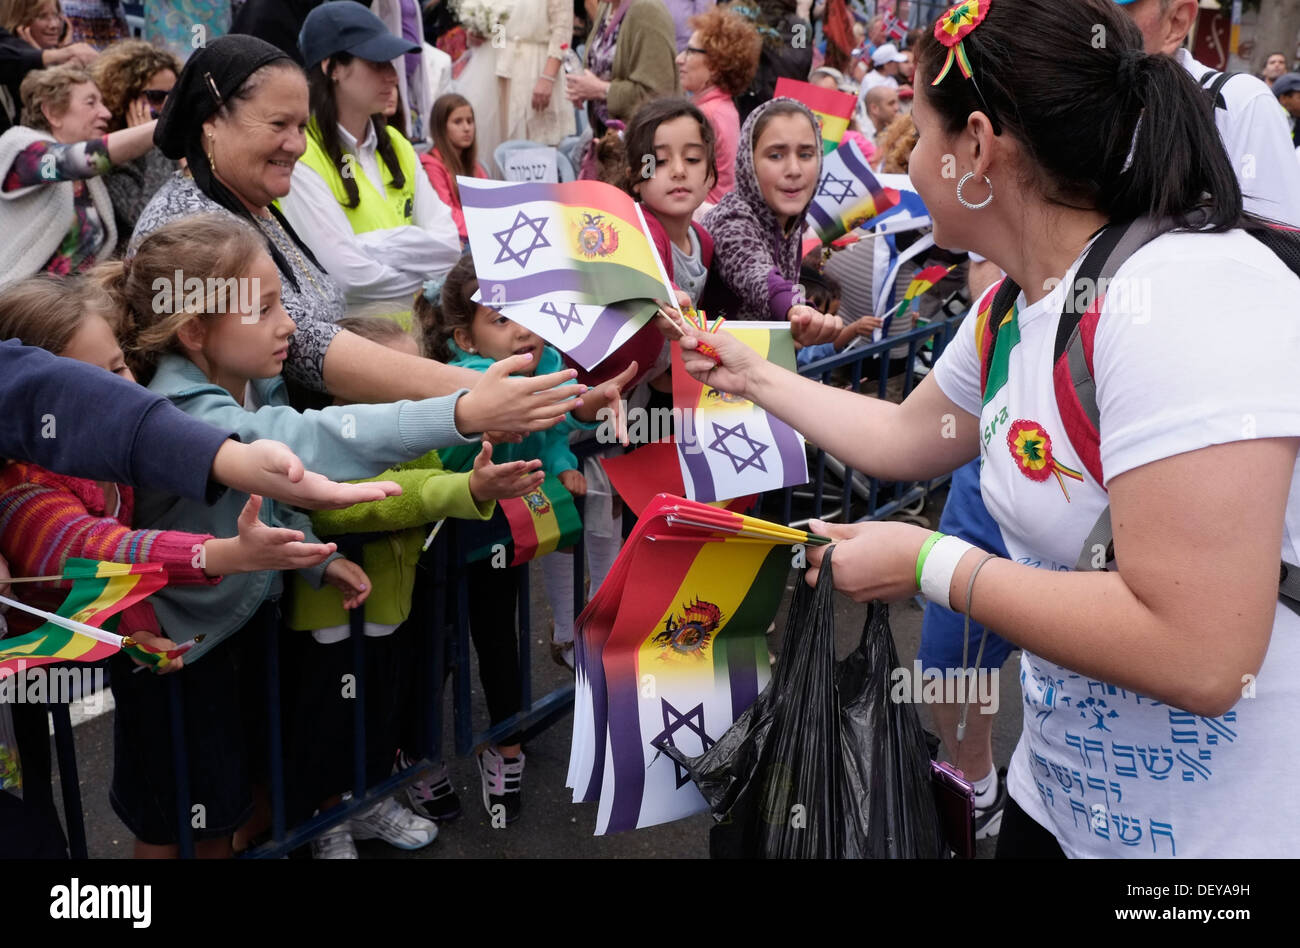 An Evangelical Christian from Bolivia distributing the Bolivian and Israeli flags to Israeli onlookers as she takes part in the annual Jerusalem's Sukkot Parade Israel. Thousands of Christians from around the world travel to Israel every year during Sukkot or the feast of the Tabernacles holiday to show their love for the Jewish people and the state of Israel. Stock Photo